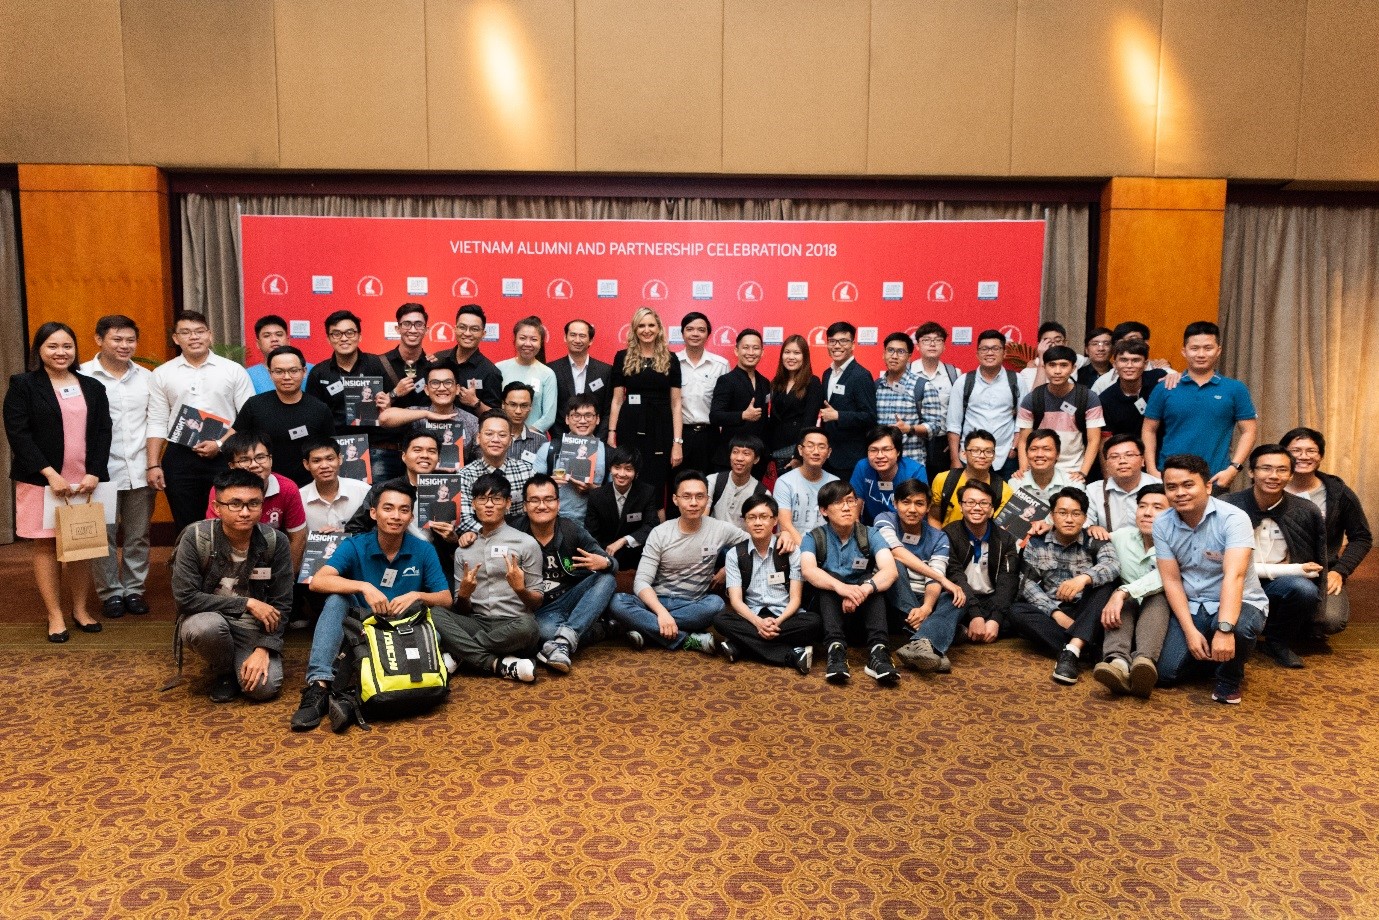 Photo from the AUT event in Vietnam